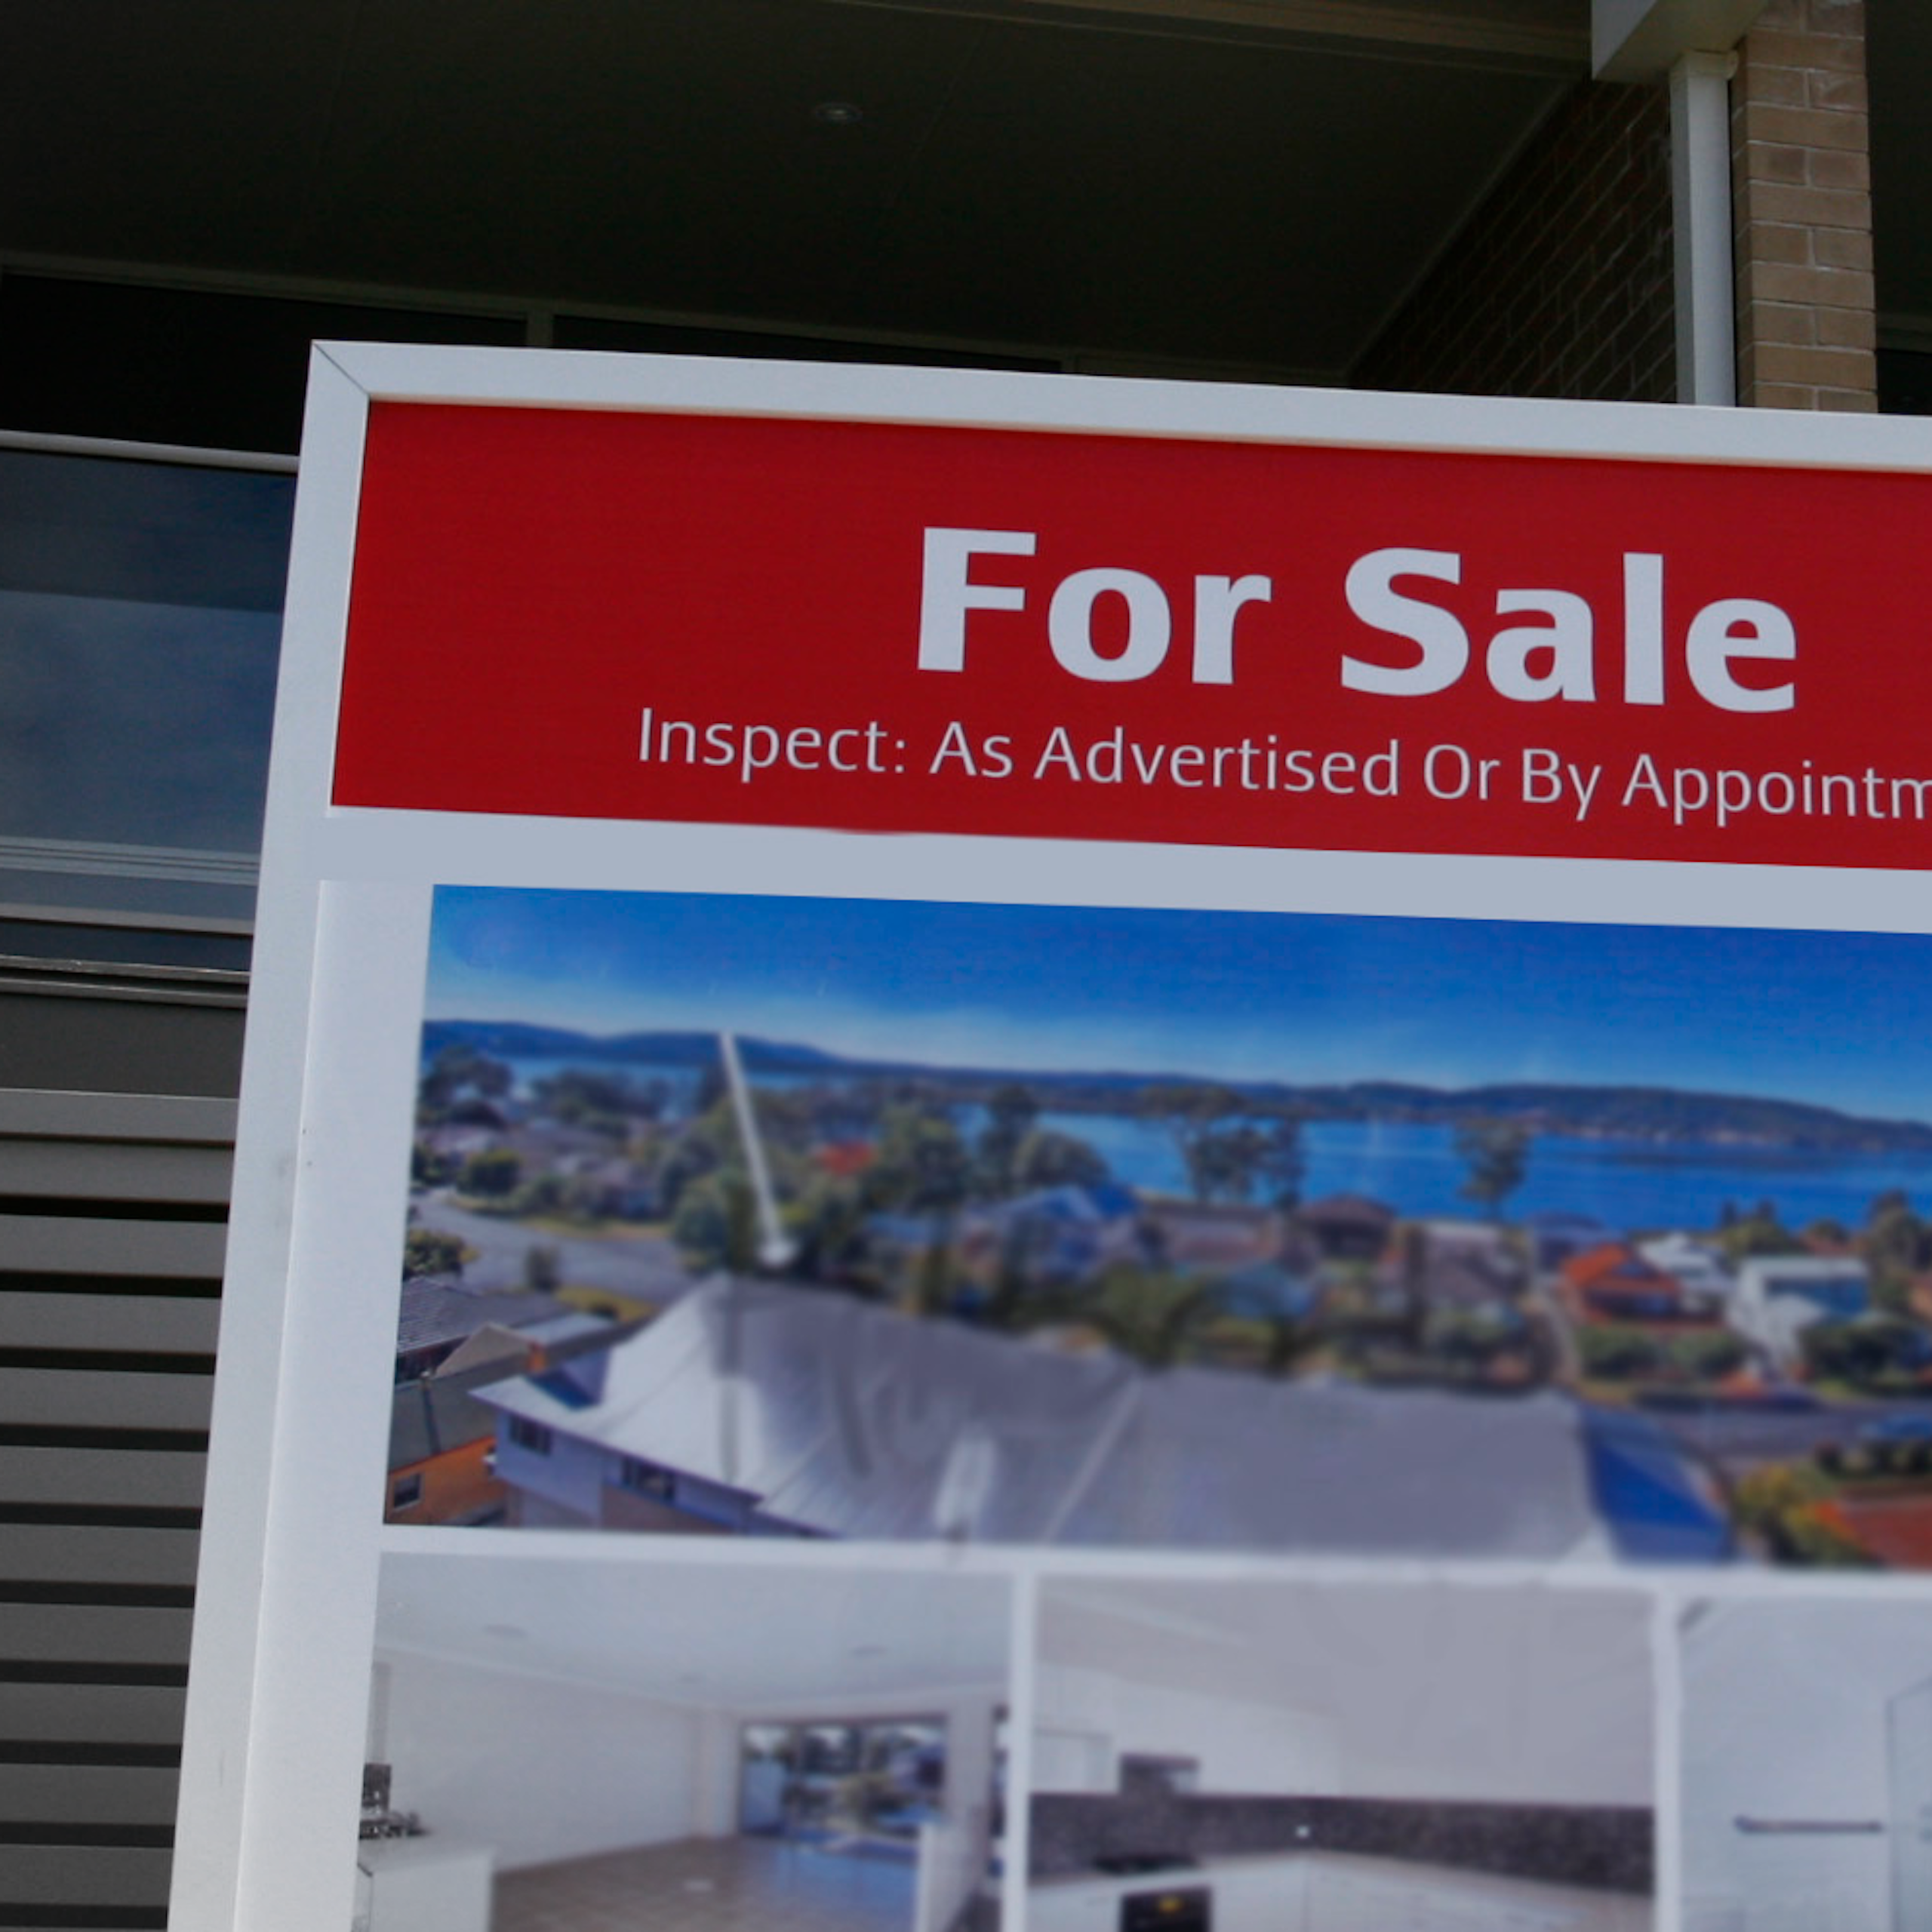 "For Sale" sign